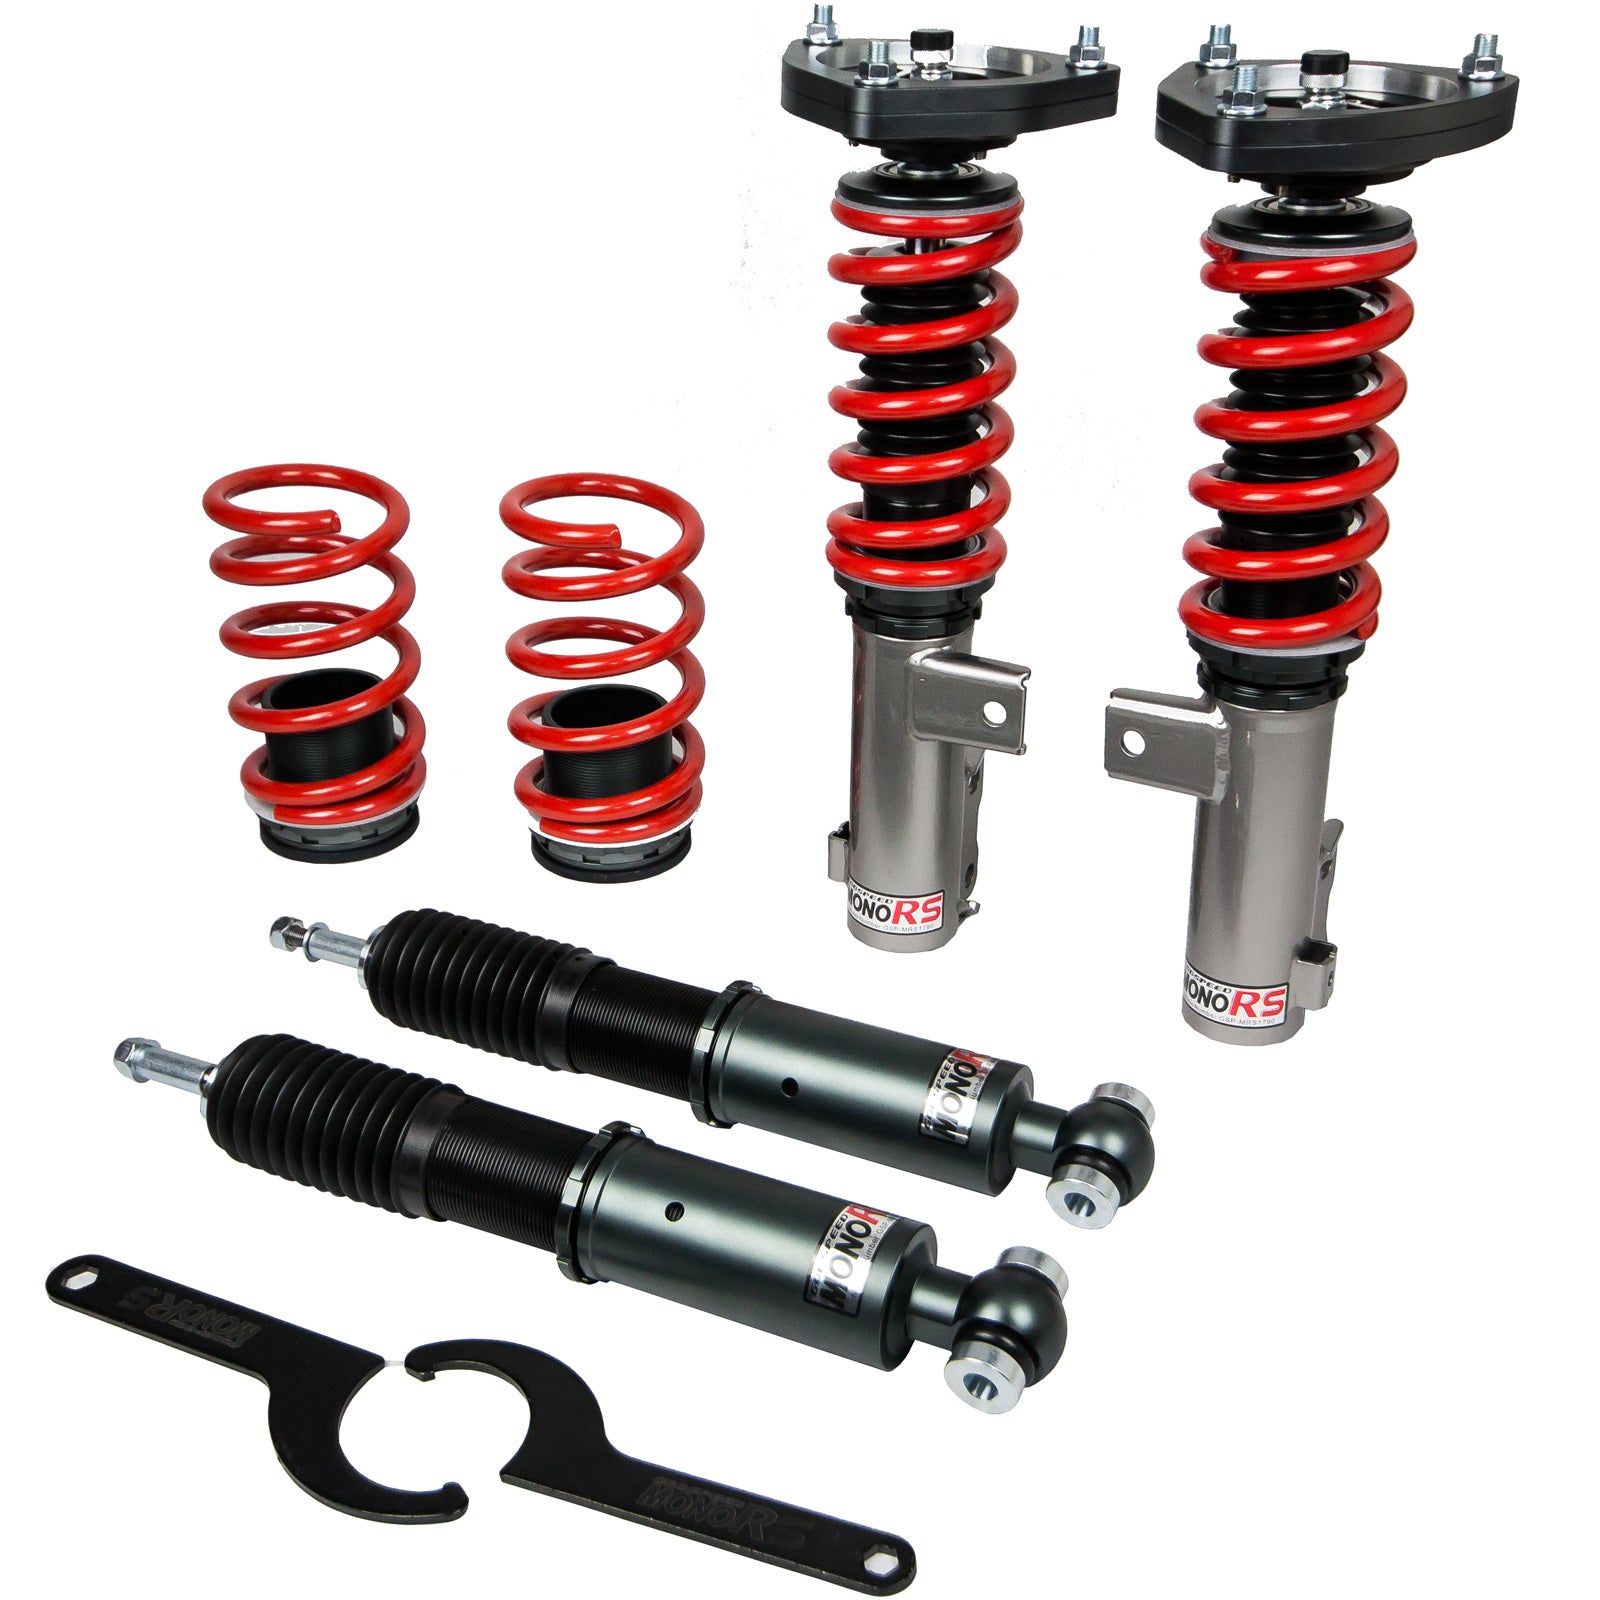 Godspeed MRS1790 MonoRS Coilover Lowering Kit, 32 Damping Adjustment, Ride Height Adjustable